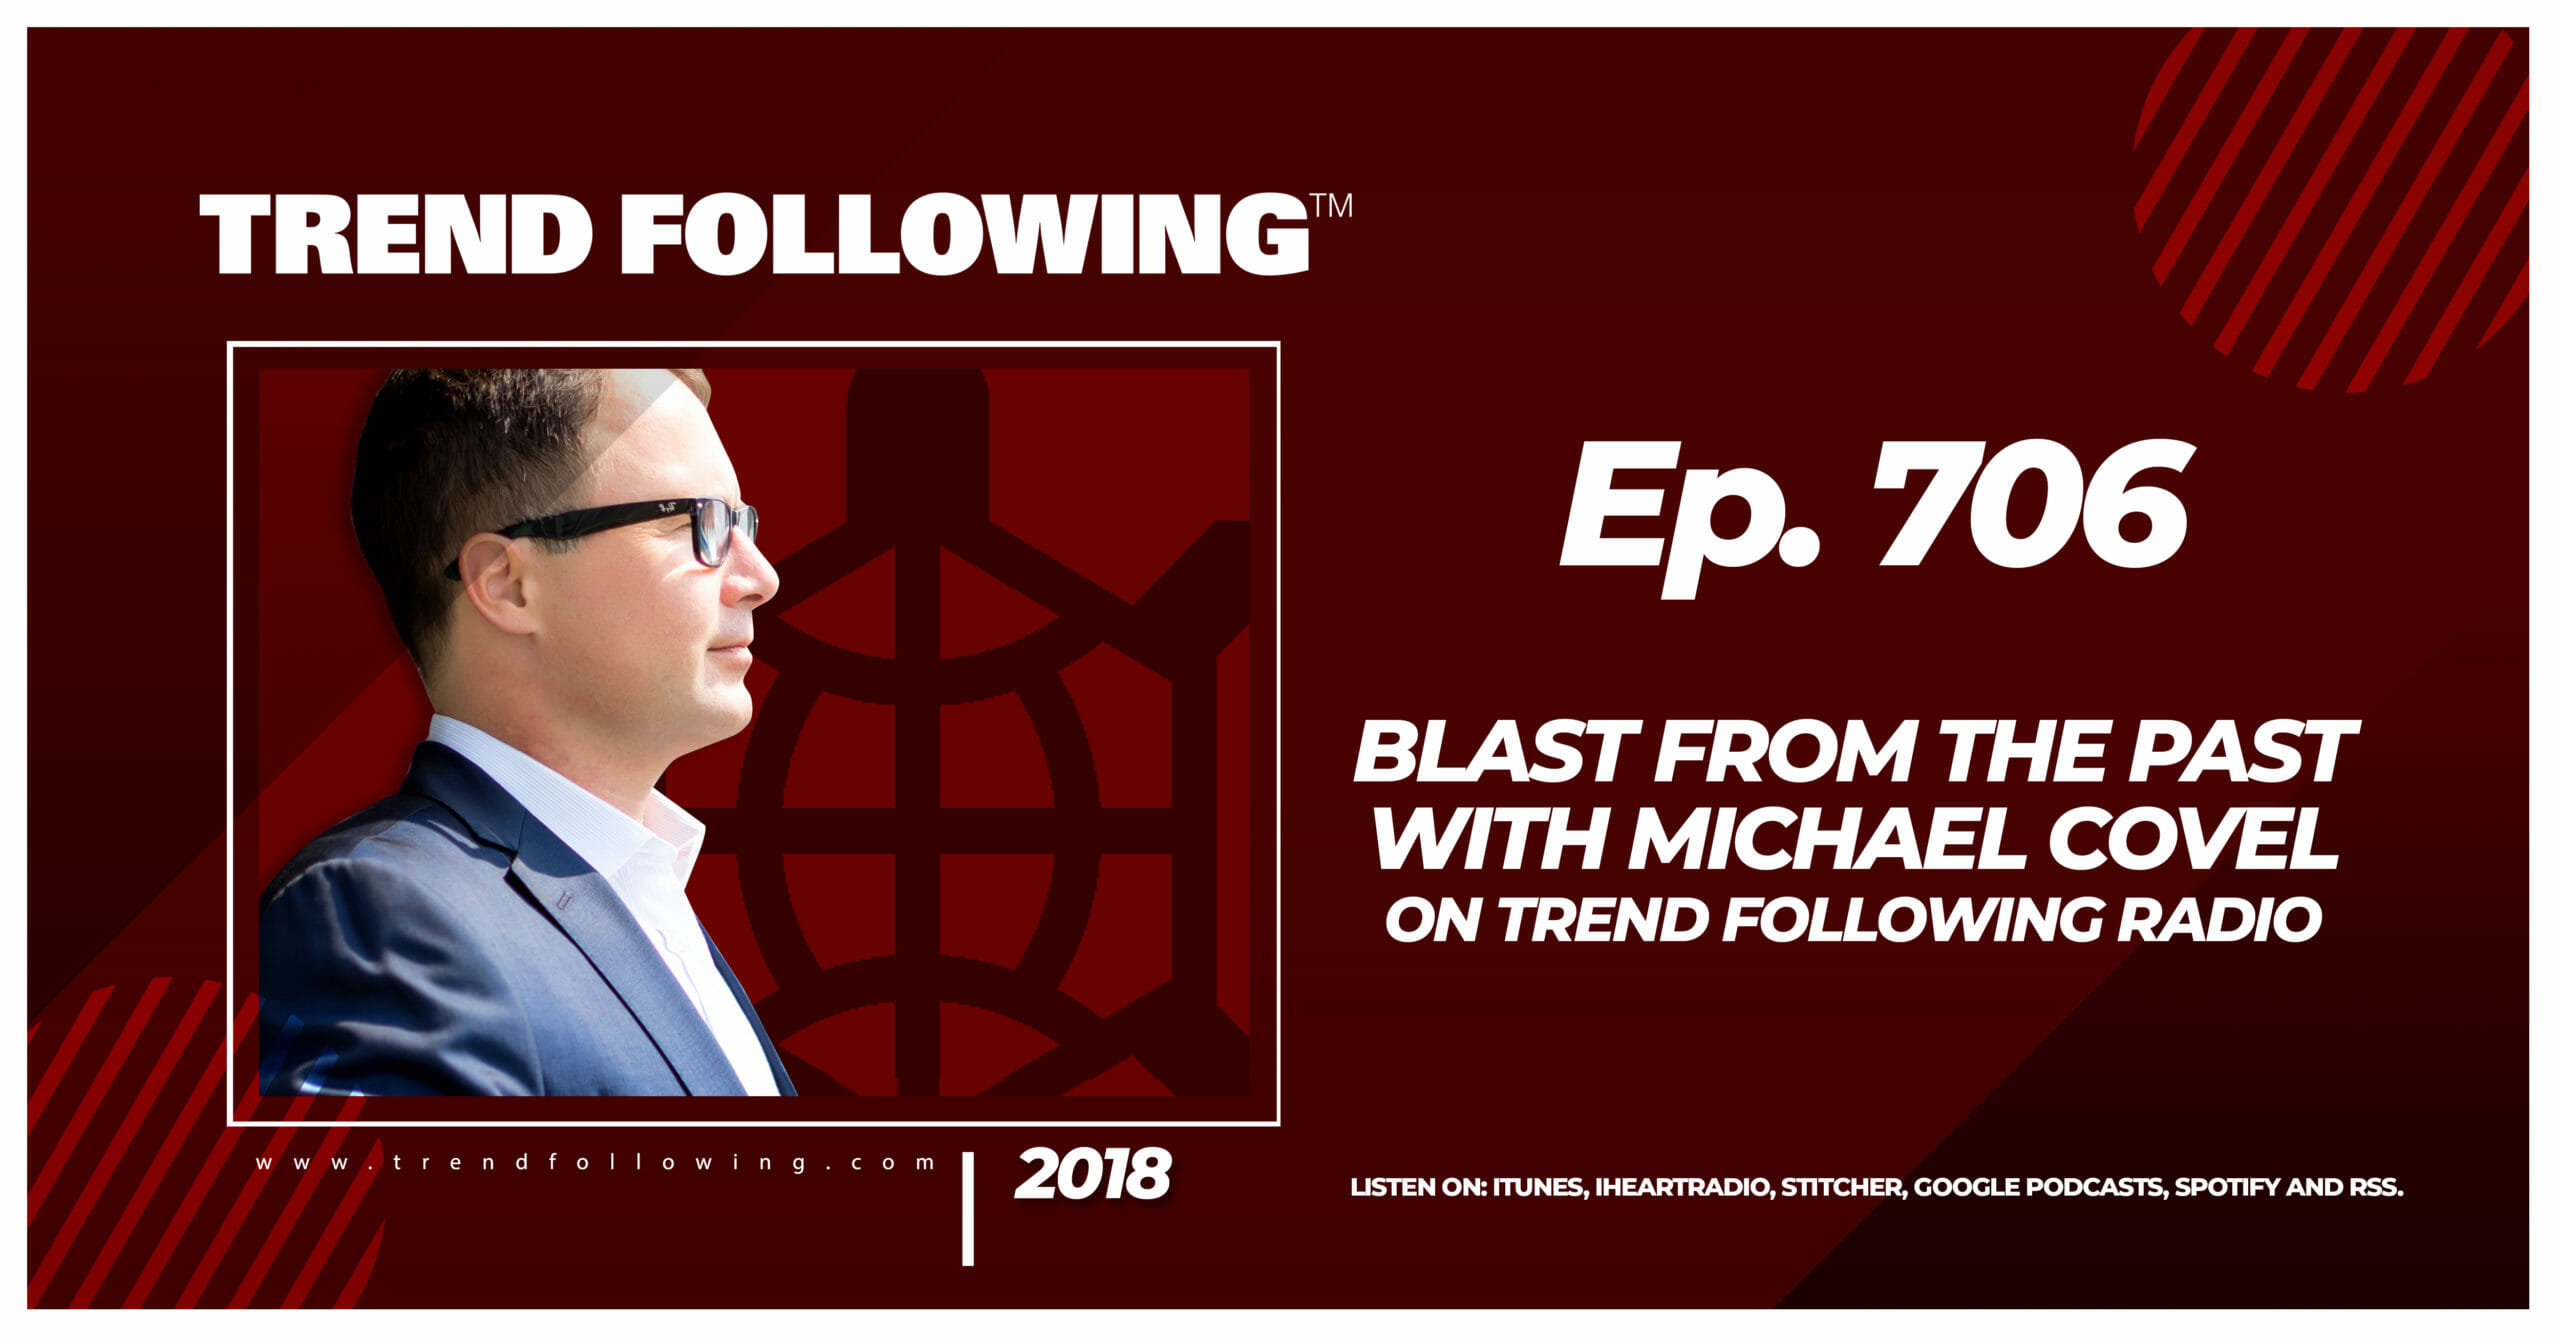 Blast from the Past with Michael Covel on Trend Following Radio